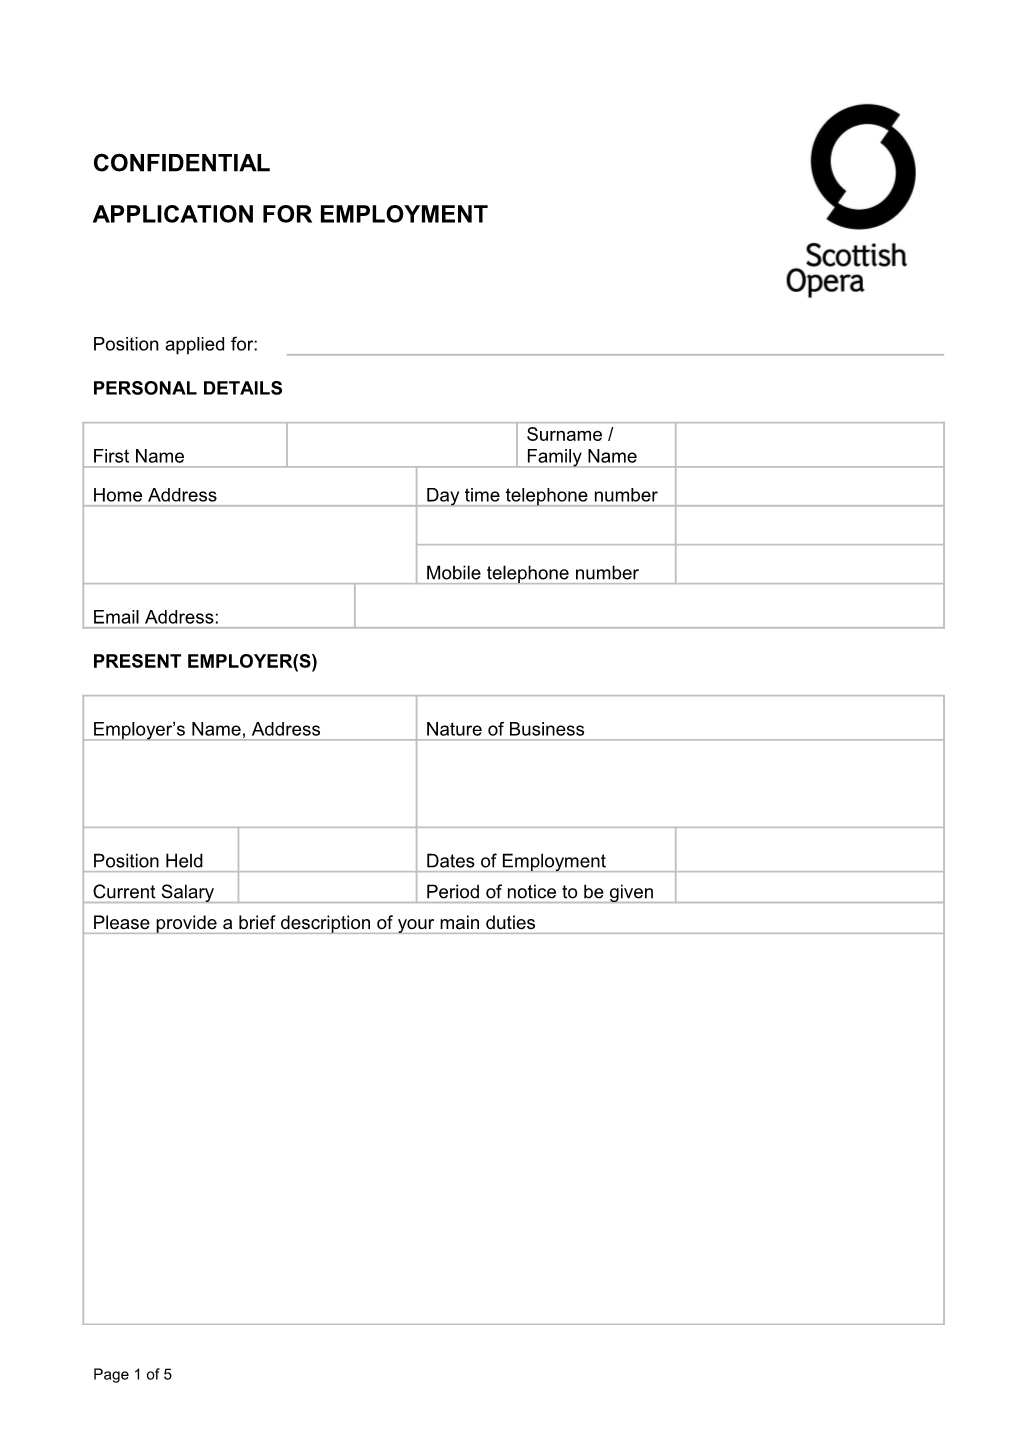 Application for Employment s163